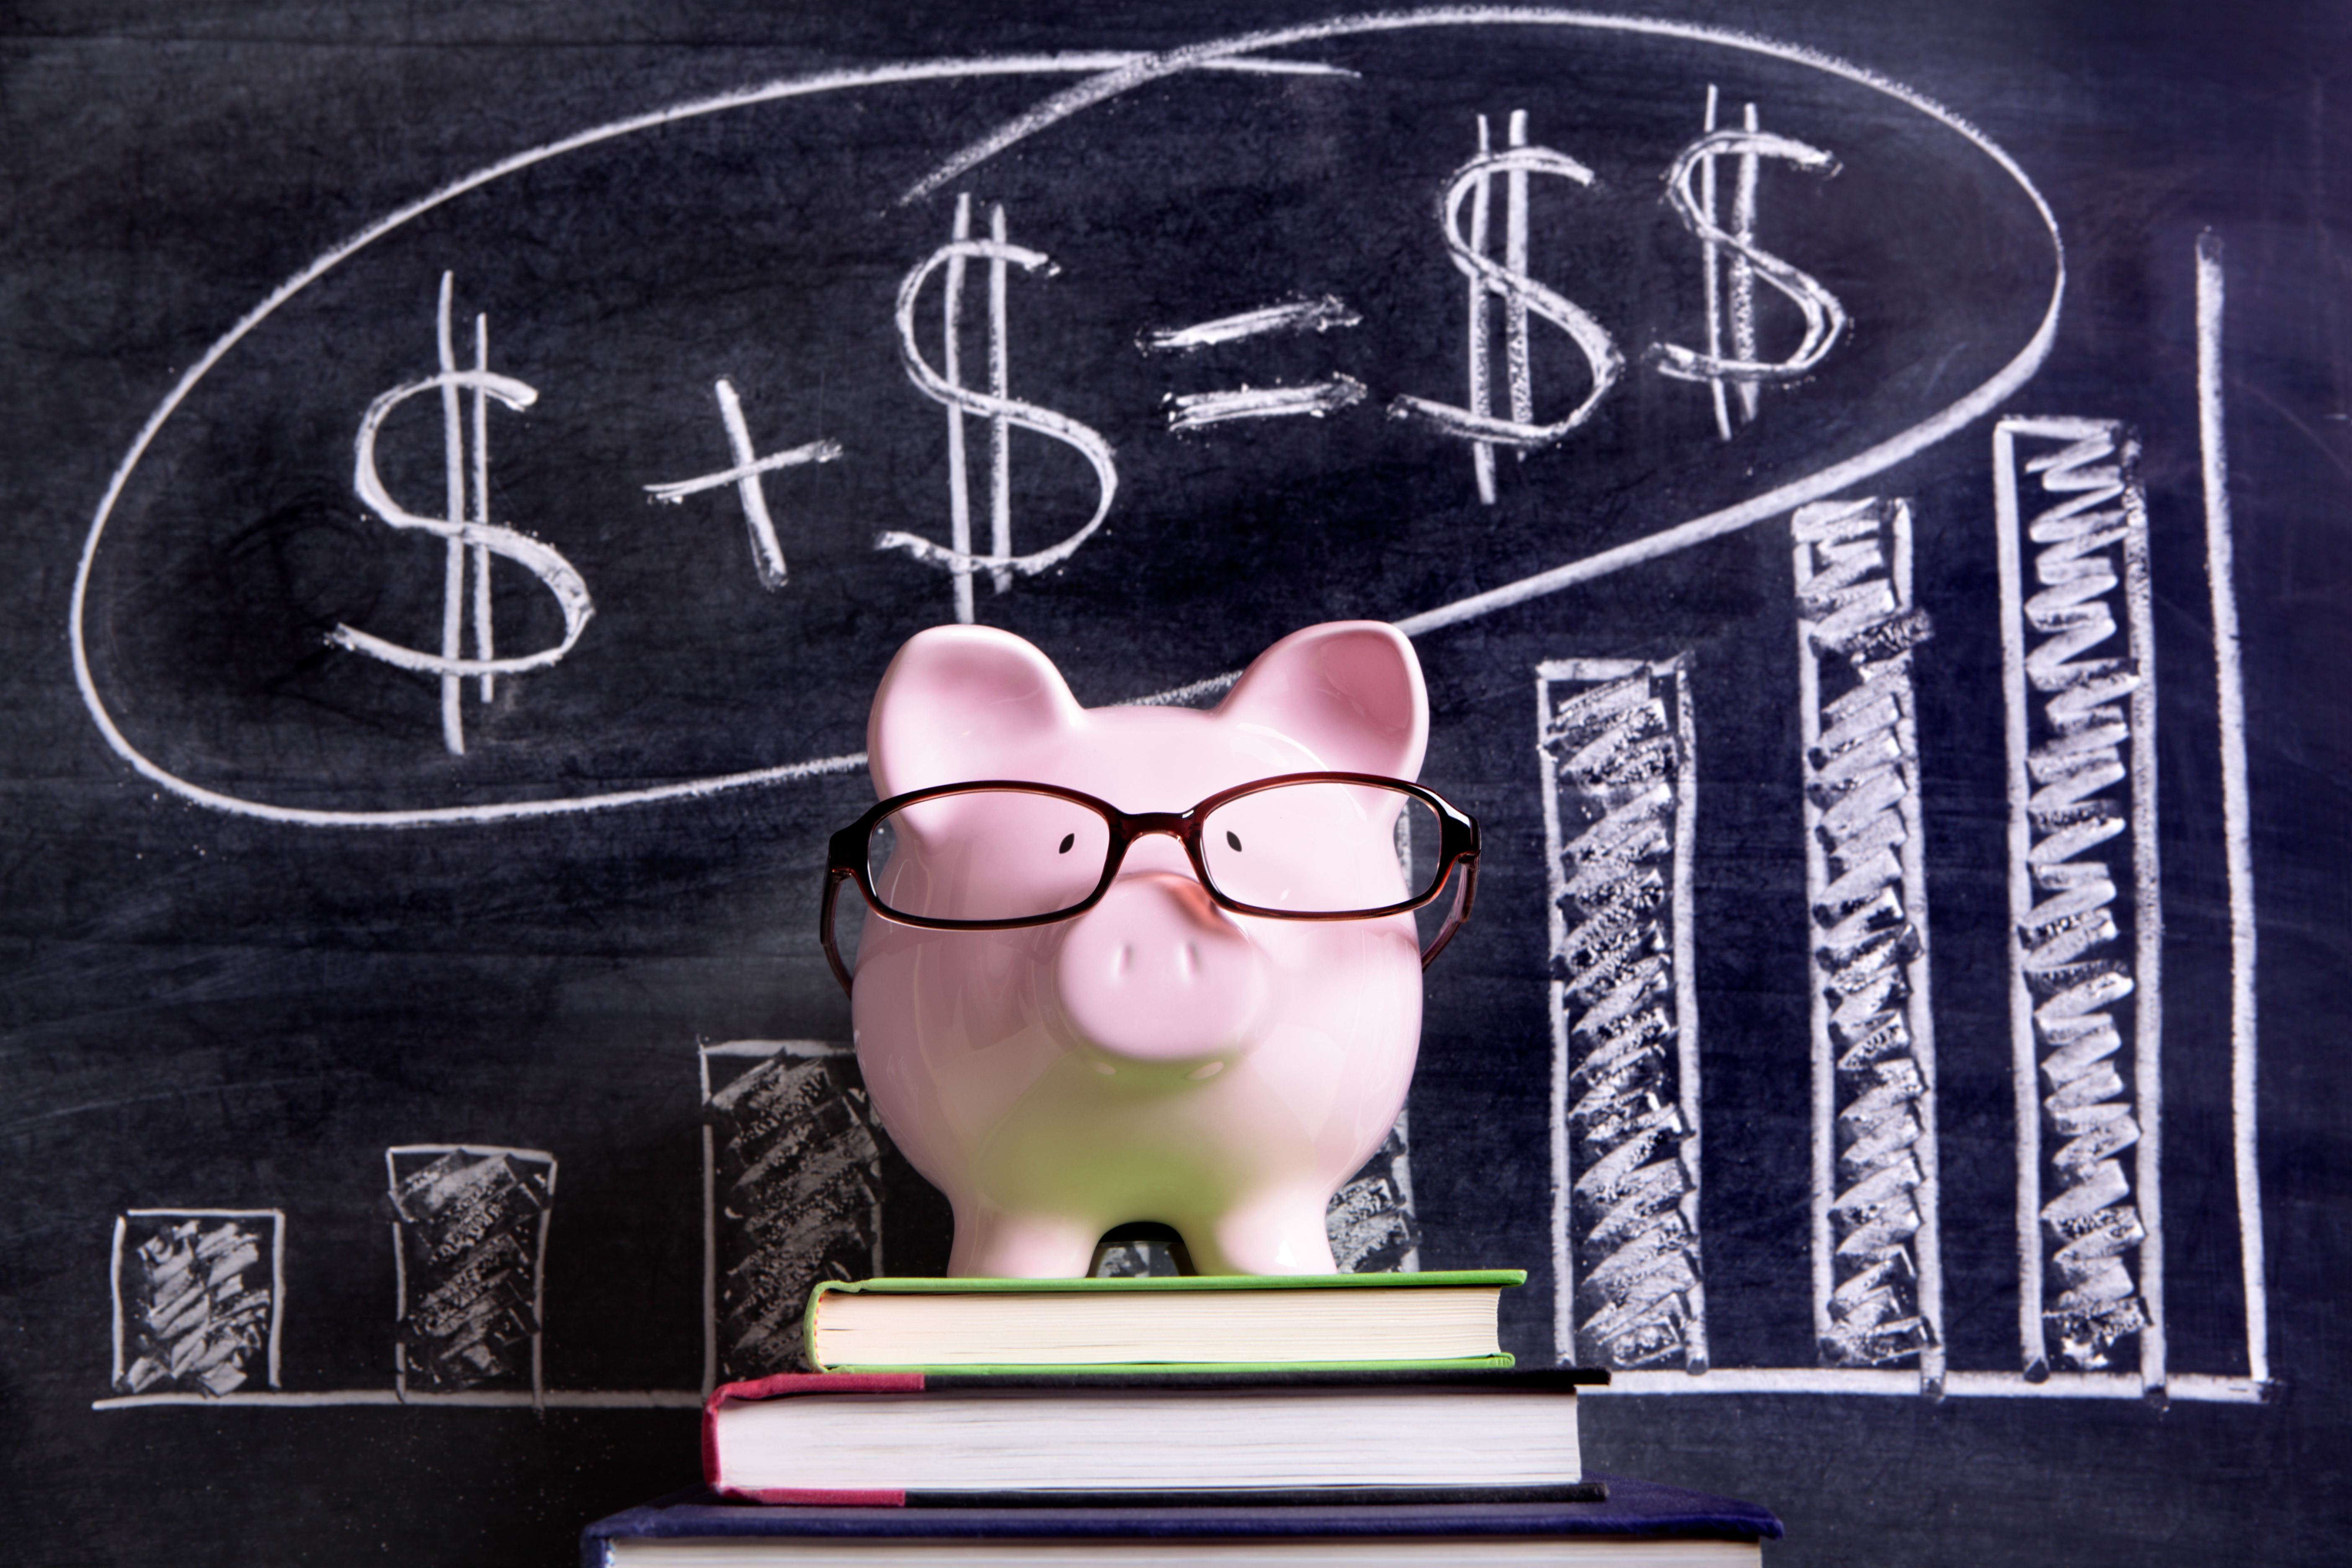 Pink piggy bank with glasses standing on books next to a blackboard with simple money math.  Sharp focus on the piggy bank with blackboard slightly blurred.